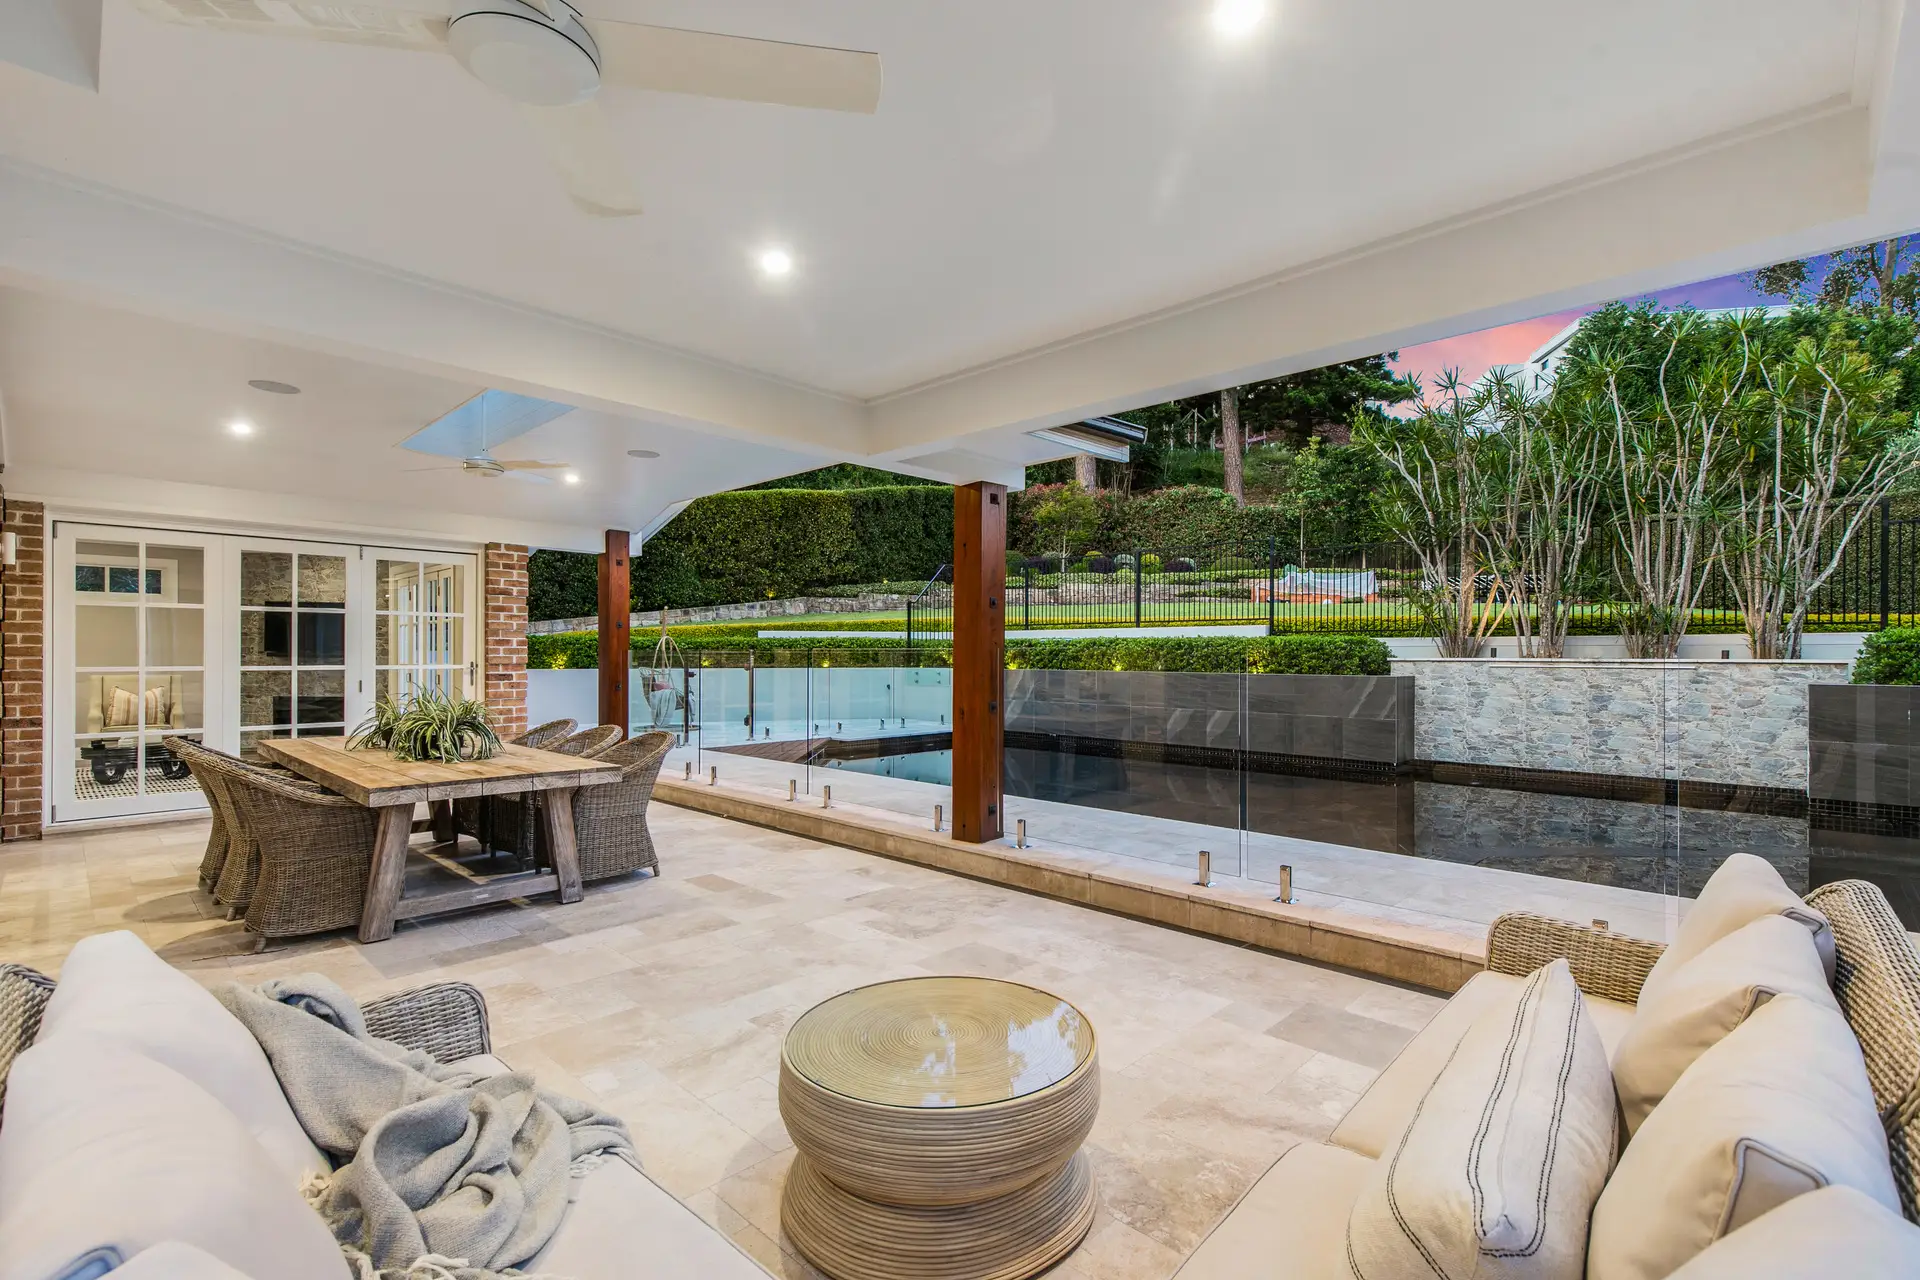 Photo #2: 23 Doris Hirst Place, West Pennant Hills - Sold by Louis Carr Real Estate